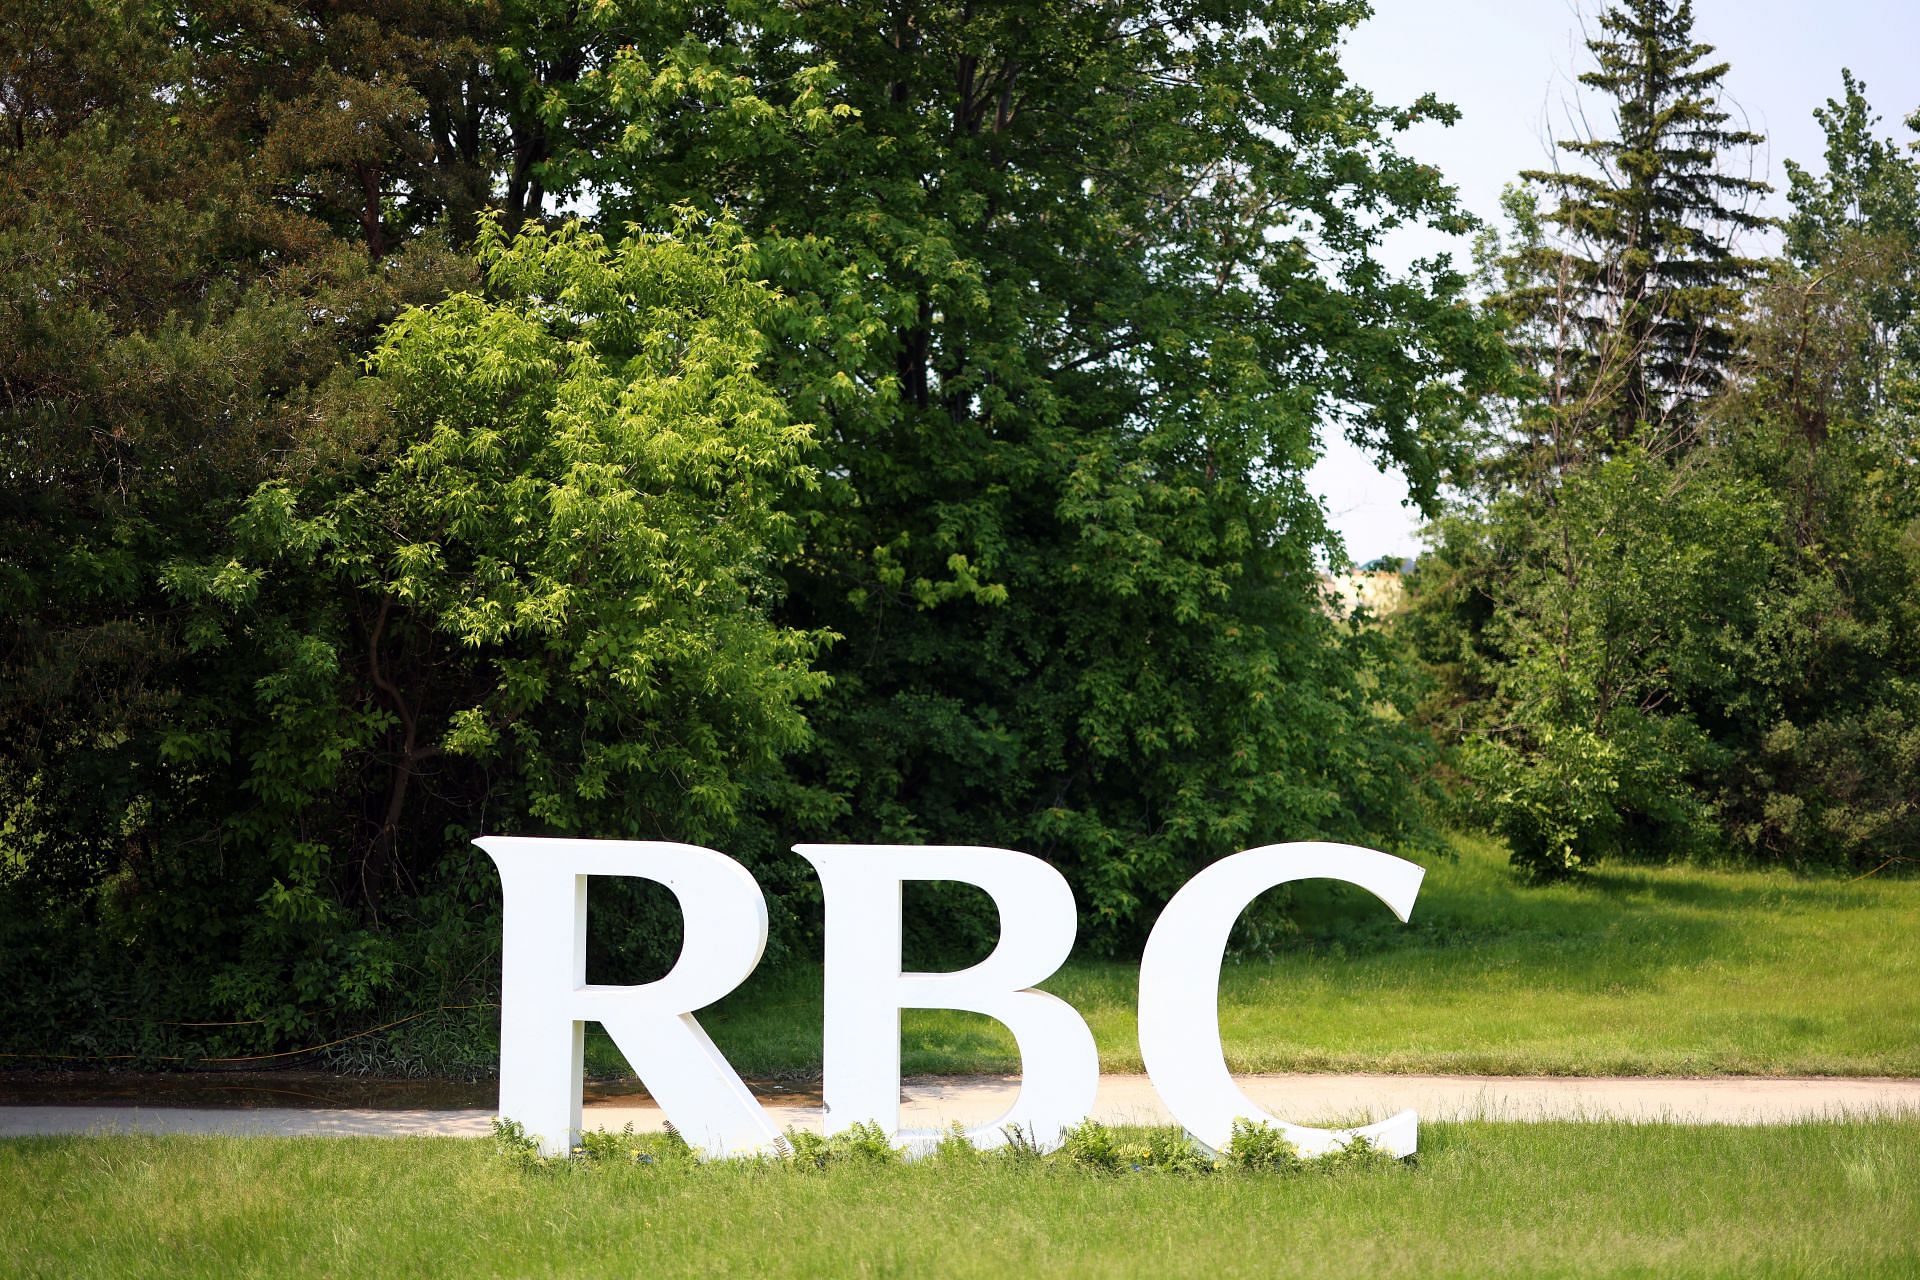 RBC Canadian Open - Previews